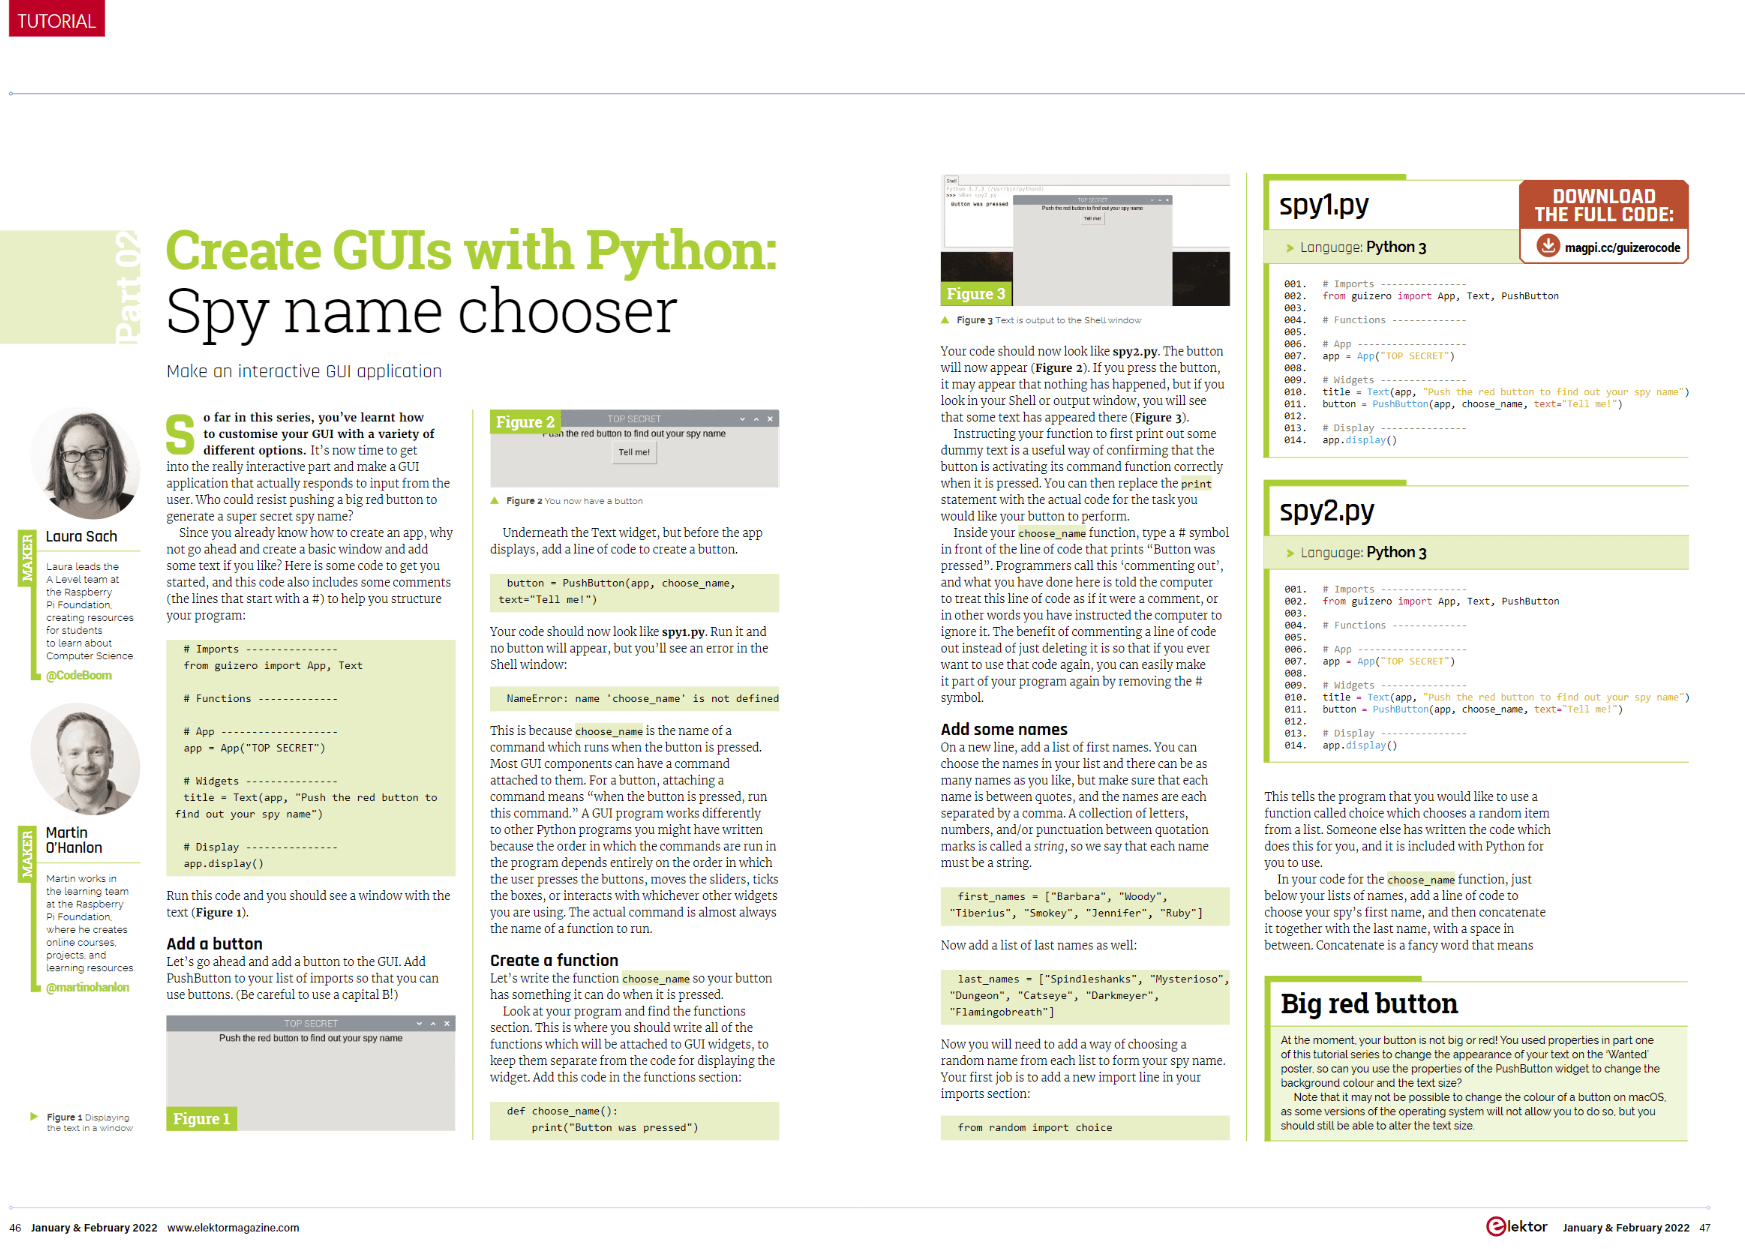 Create GUIs with Python (Part 2) 